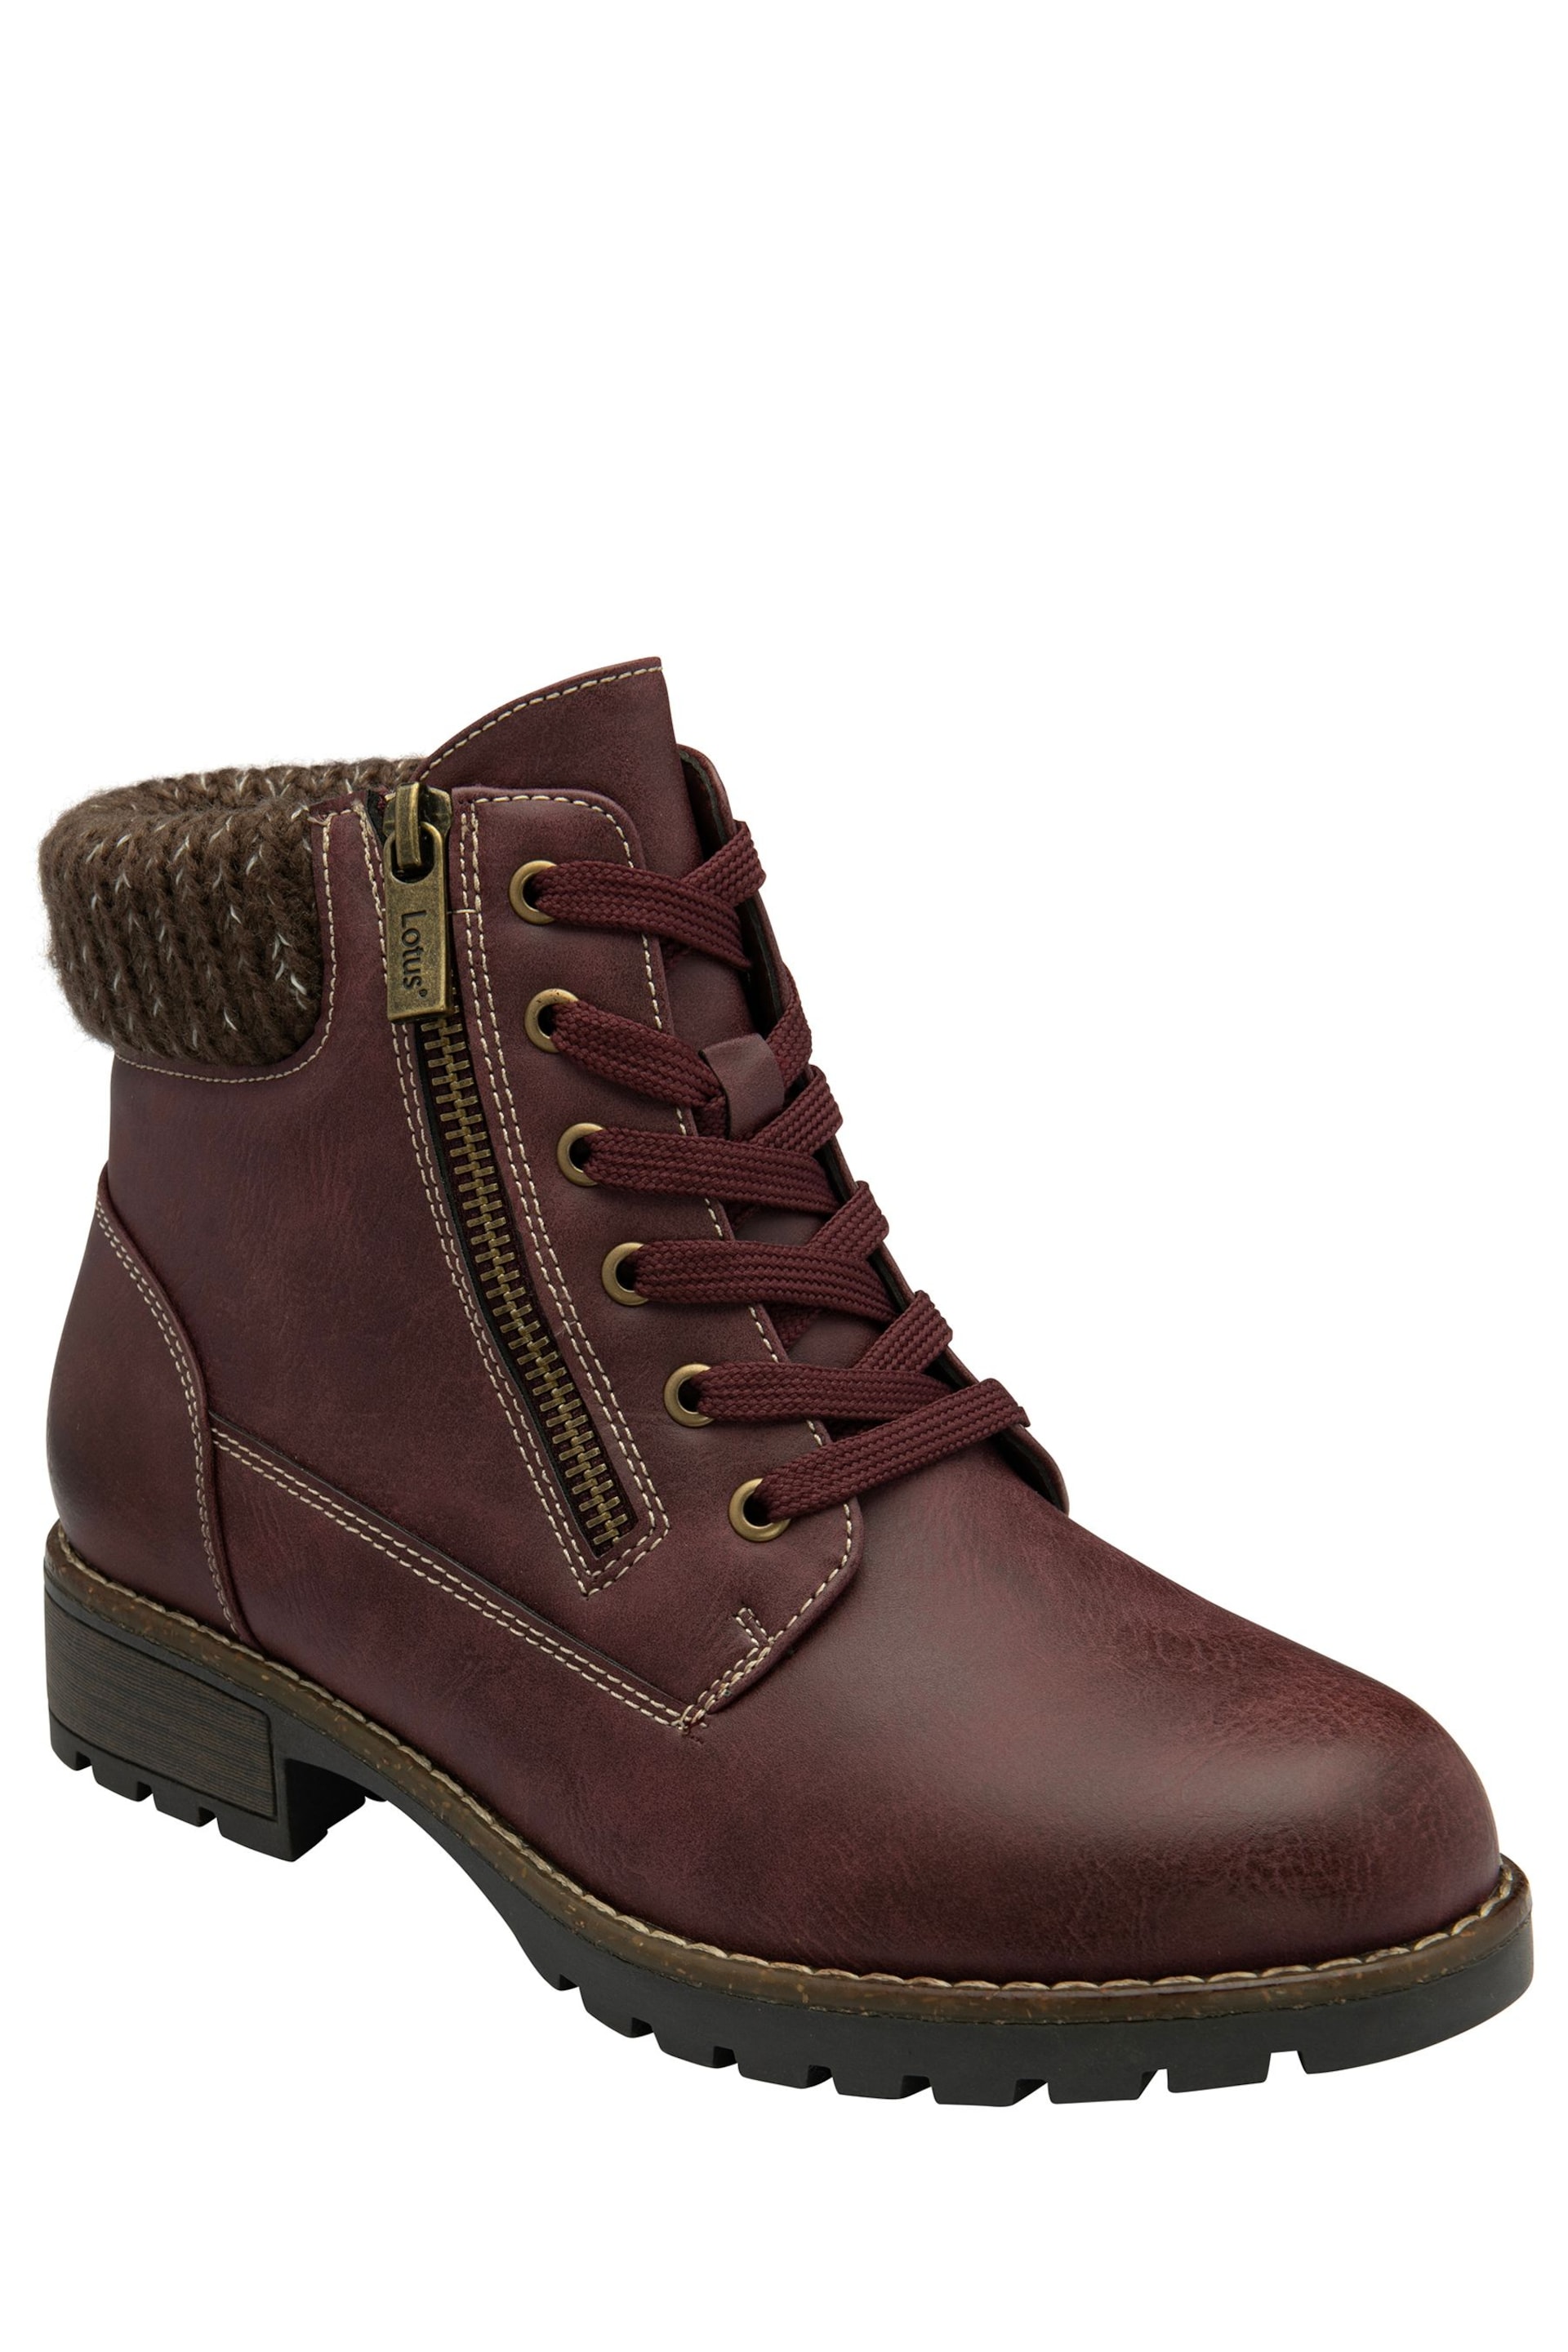 Lotus Red Lace-Up Ankle Boots - Image 1 of 4